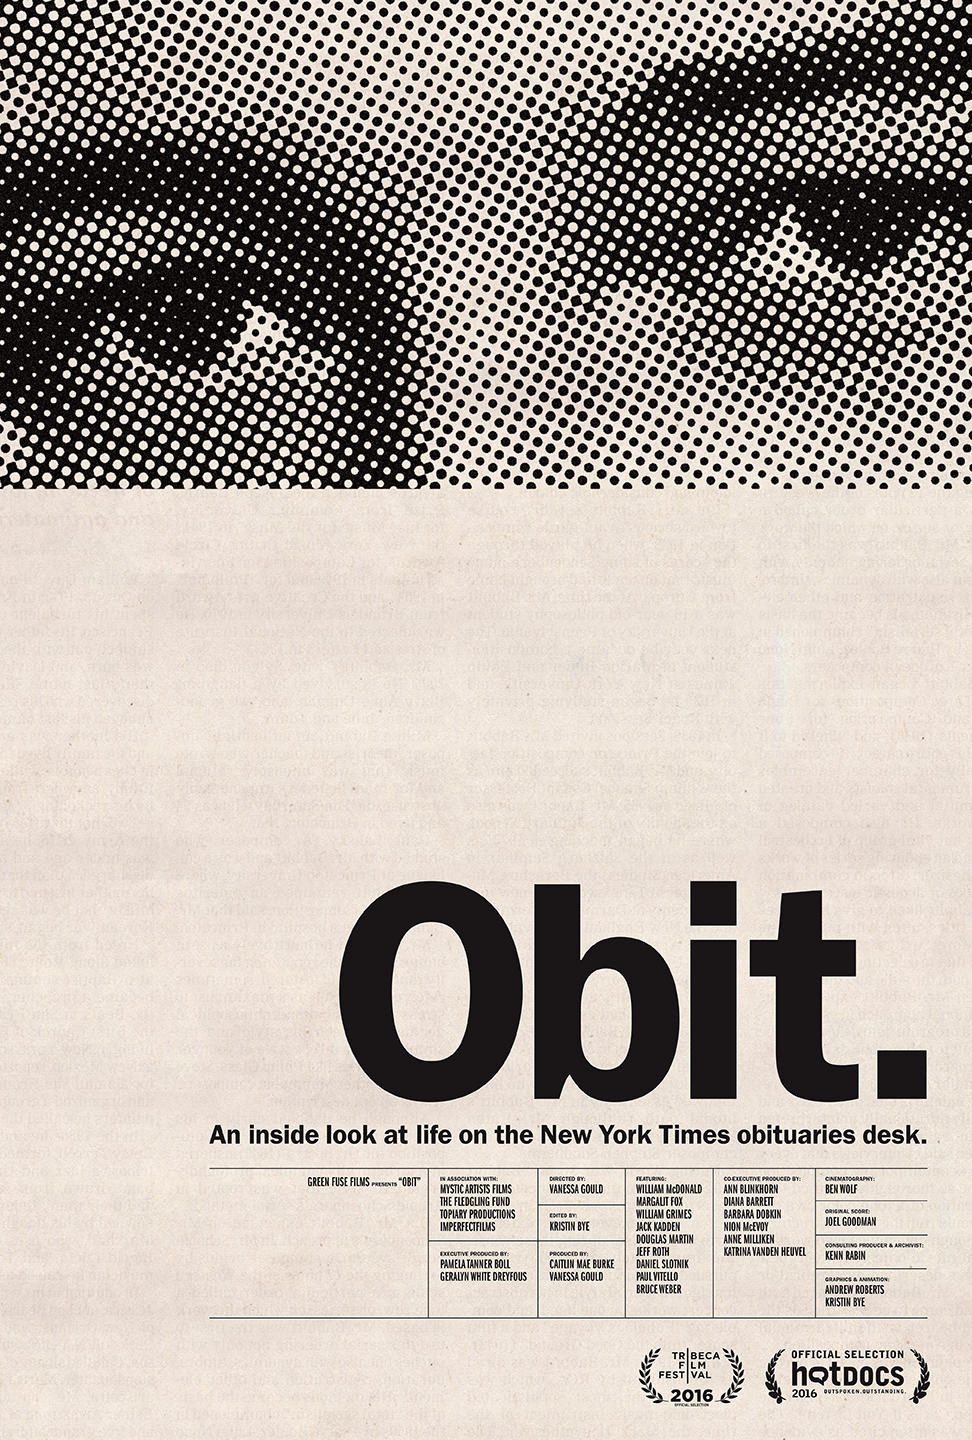 Friday Night at the Movies – Obit